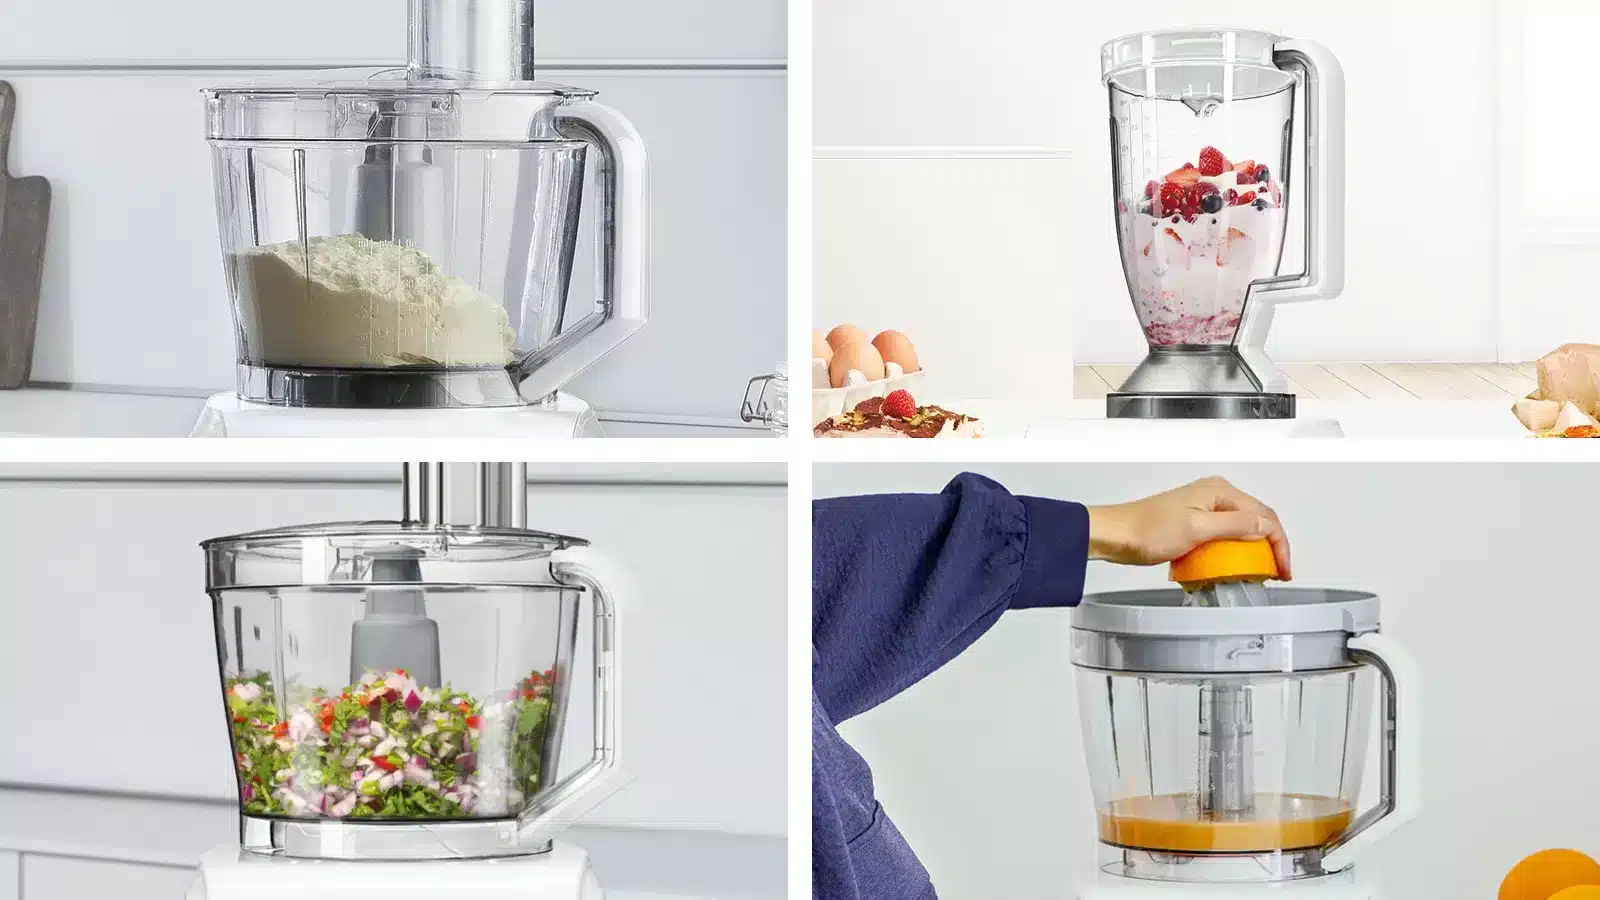 Bosch Home - The Bosch MultiTalent 8 1250W food processor comes with a  variety of accessories such as a large 3.9l mixing bowl, 1.5l blender,  citrus press, dough tool, whisk and a